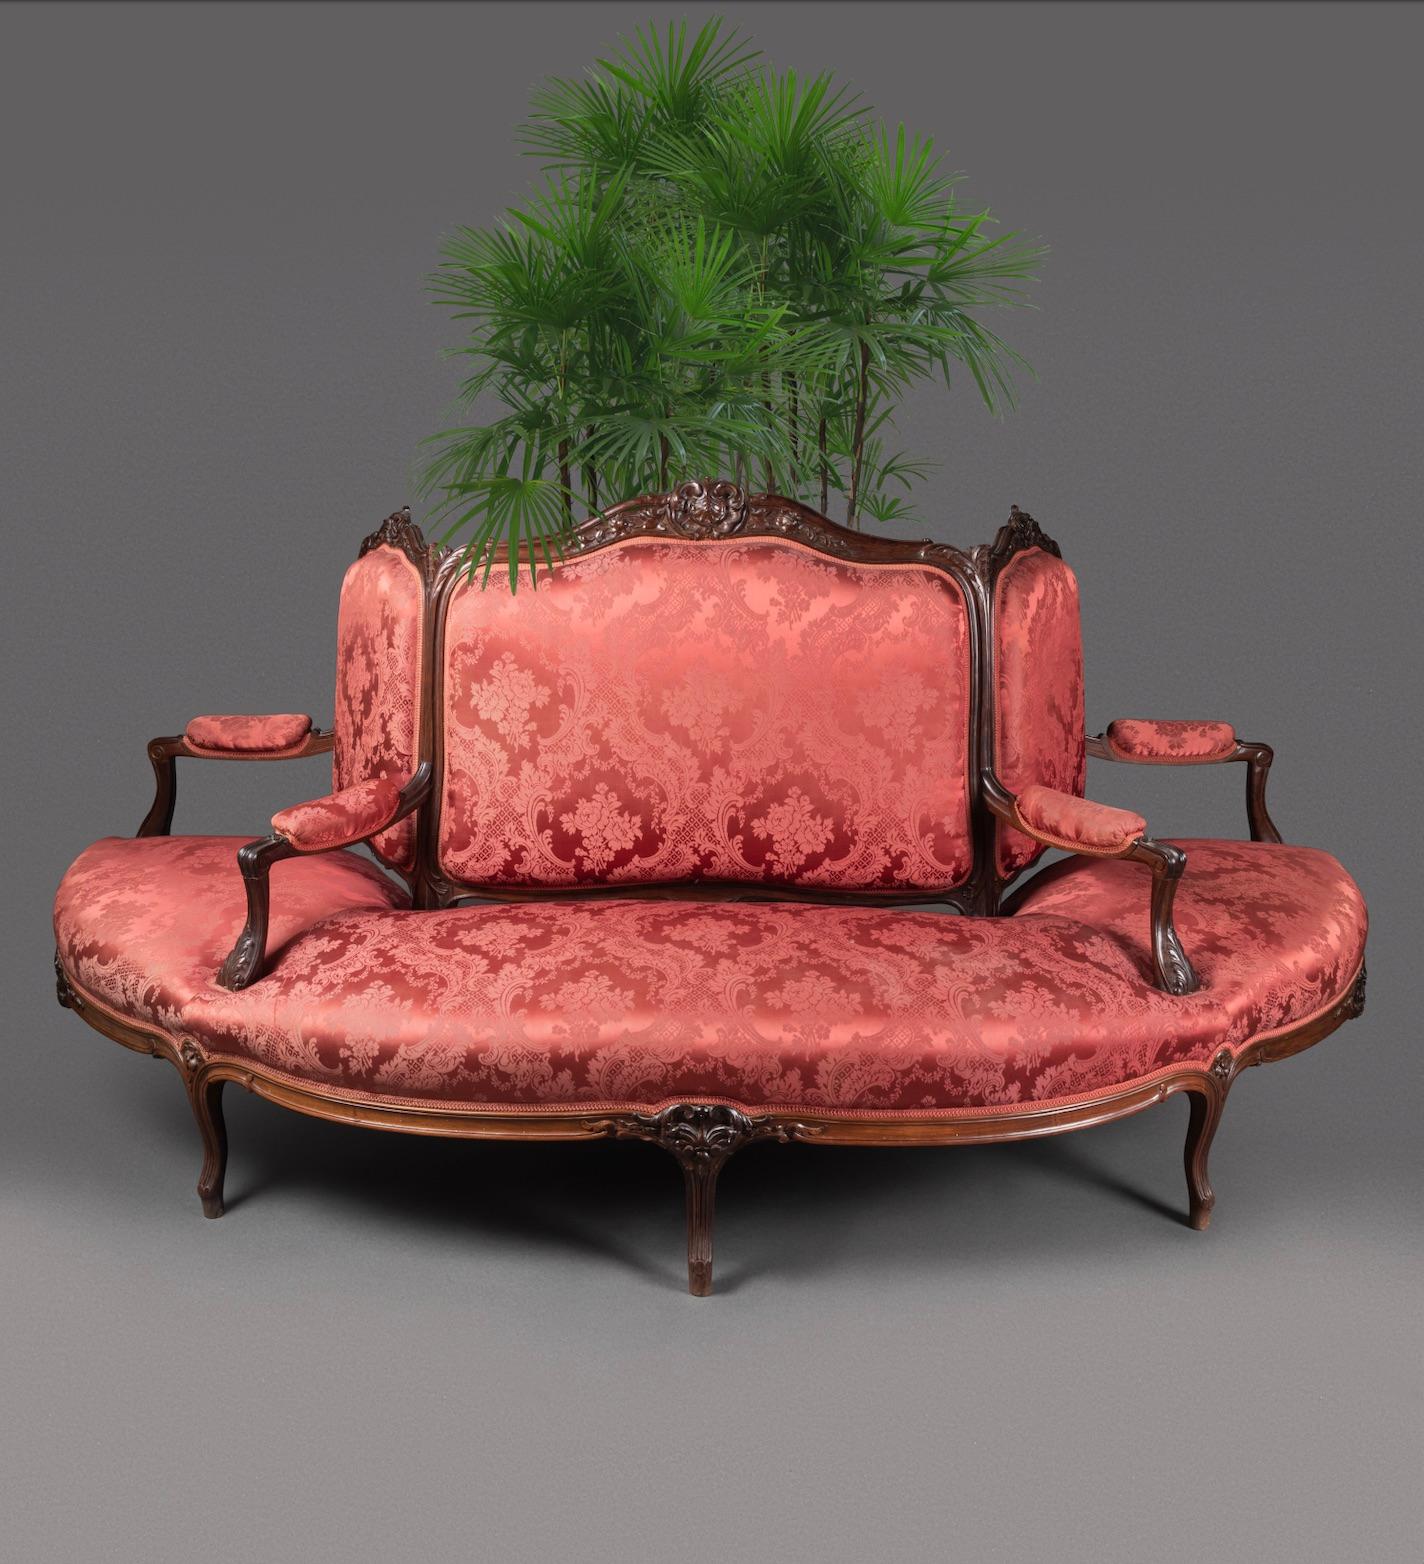 Very unusual 19th-century demi-borne in rosewood and damask fabric with an attached planter in the back.
France, circa 1860